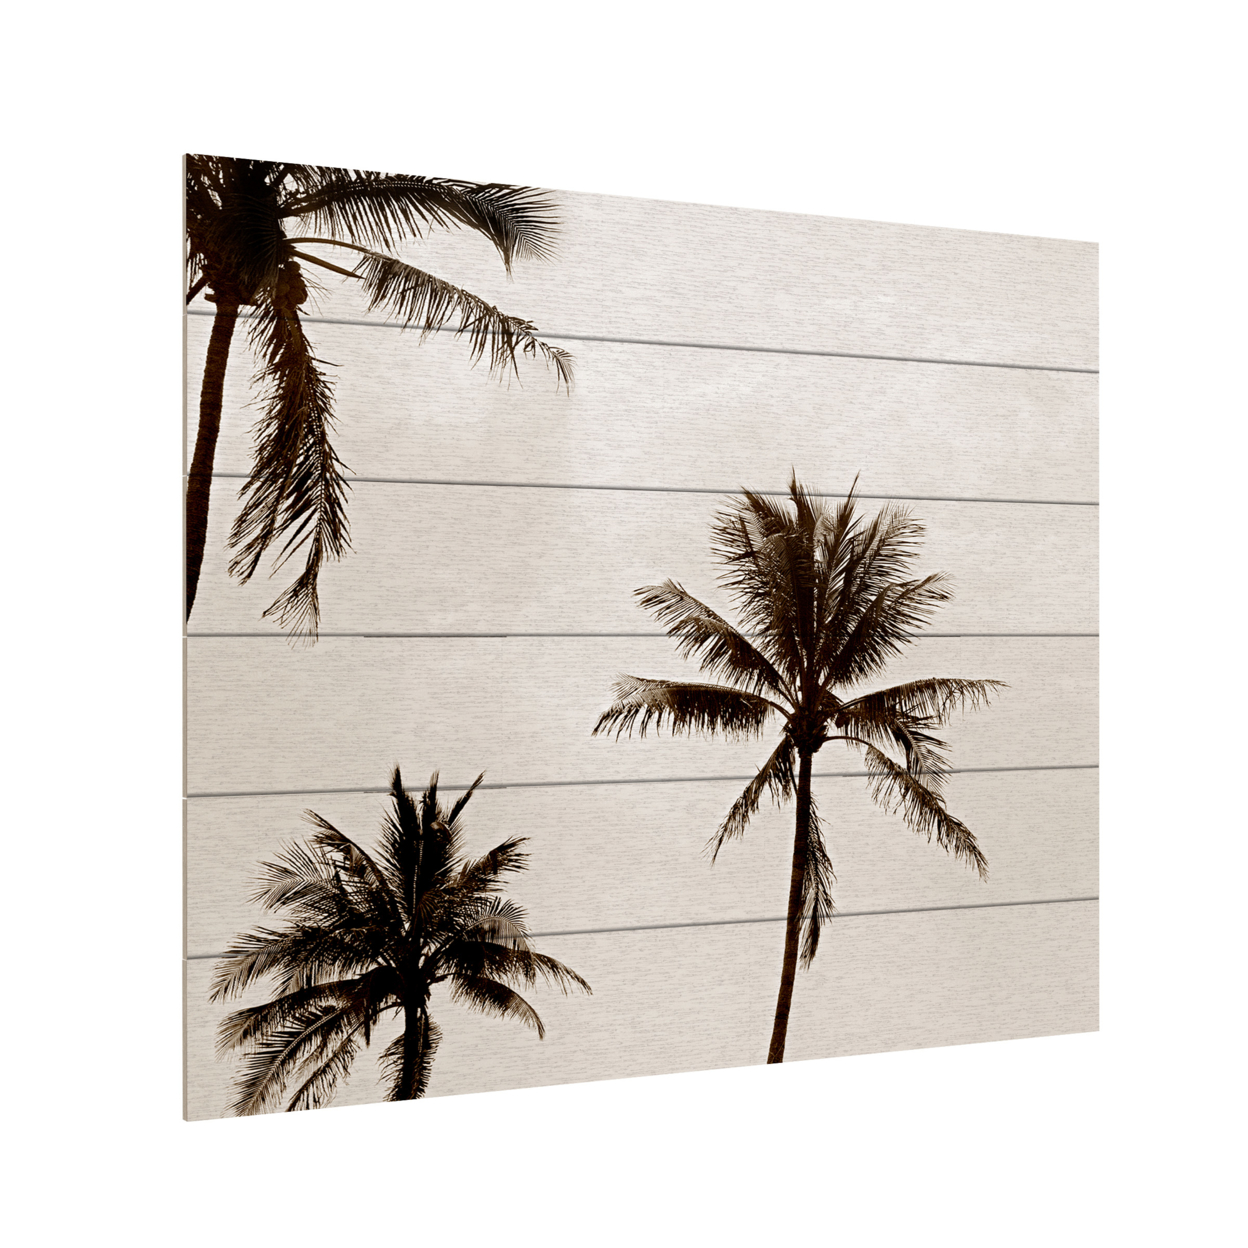 Wooden Slat Art 18 X 22 Inches Titled Black & White Palms Ready To Hang Home Decor Picture